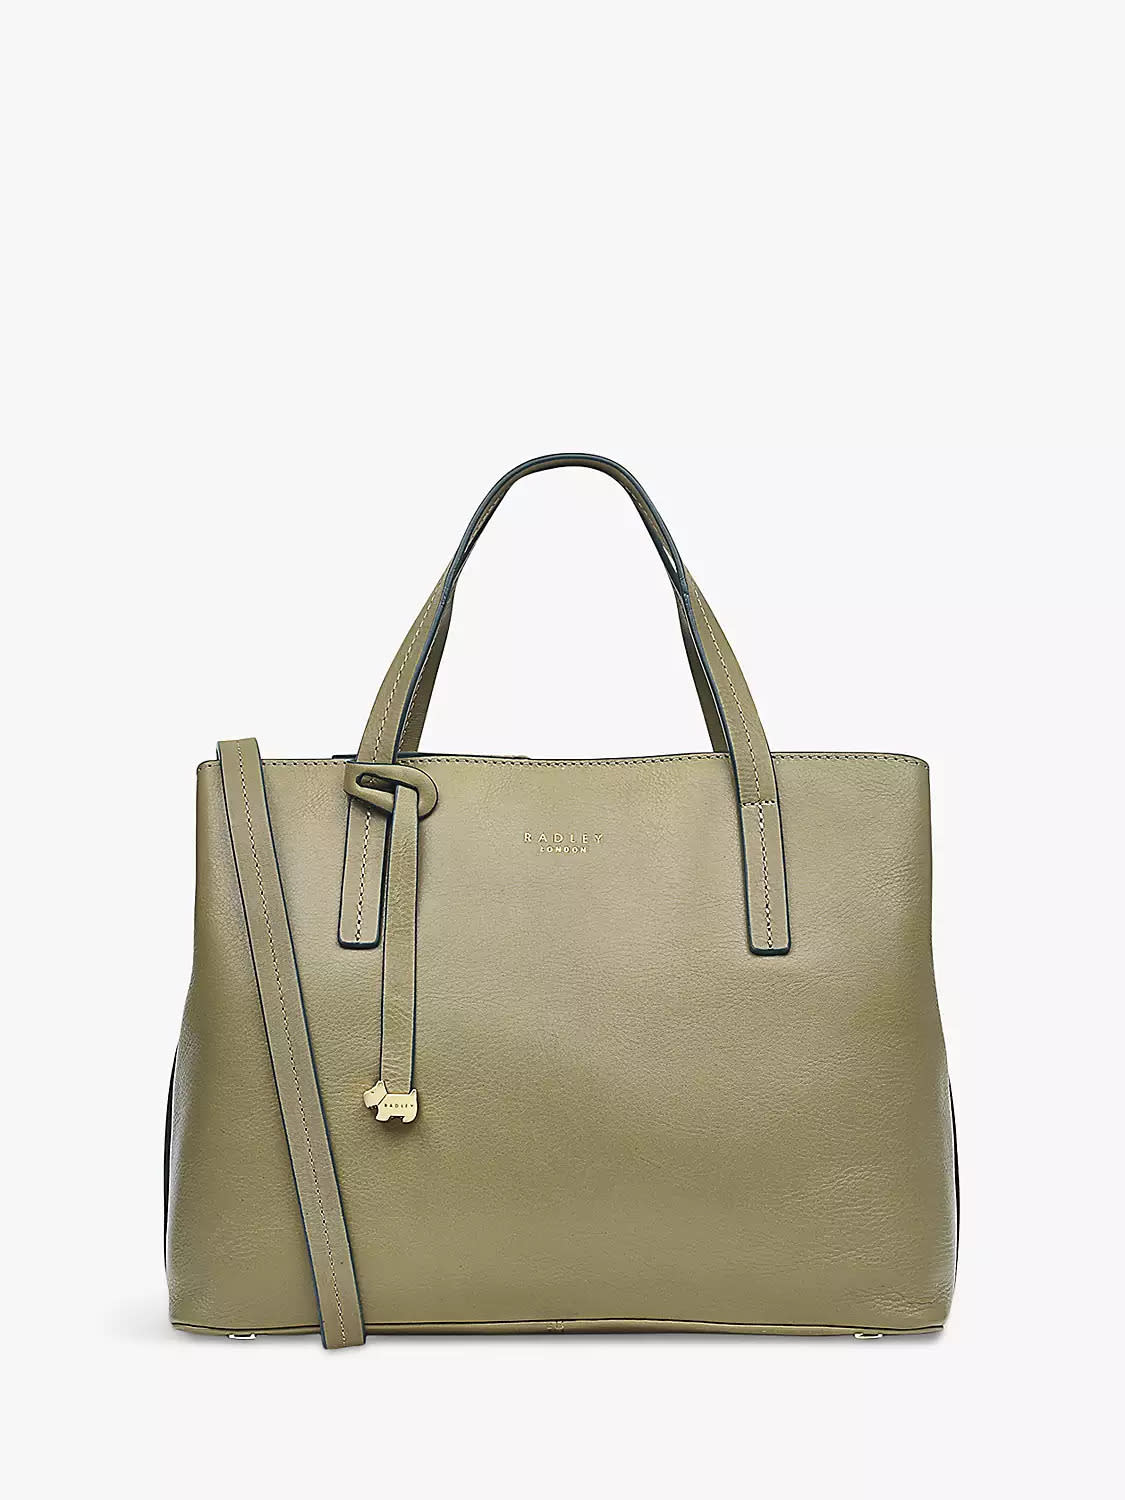 This Radley bag is a wardrobe classic that'll never date. (John Lewis & Partners)